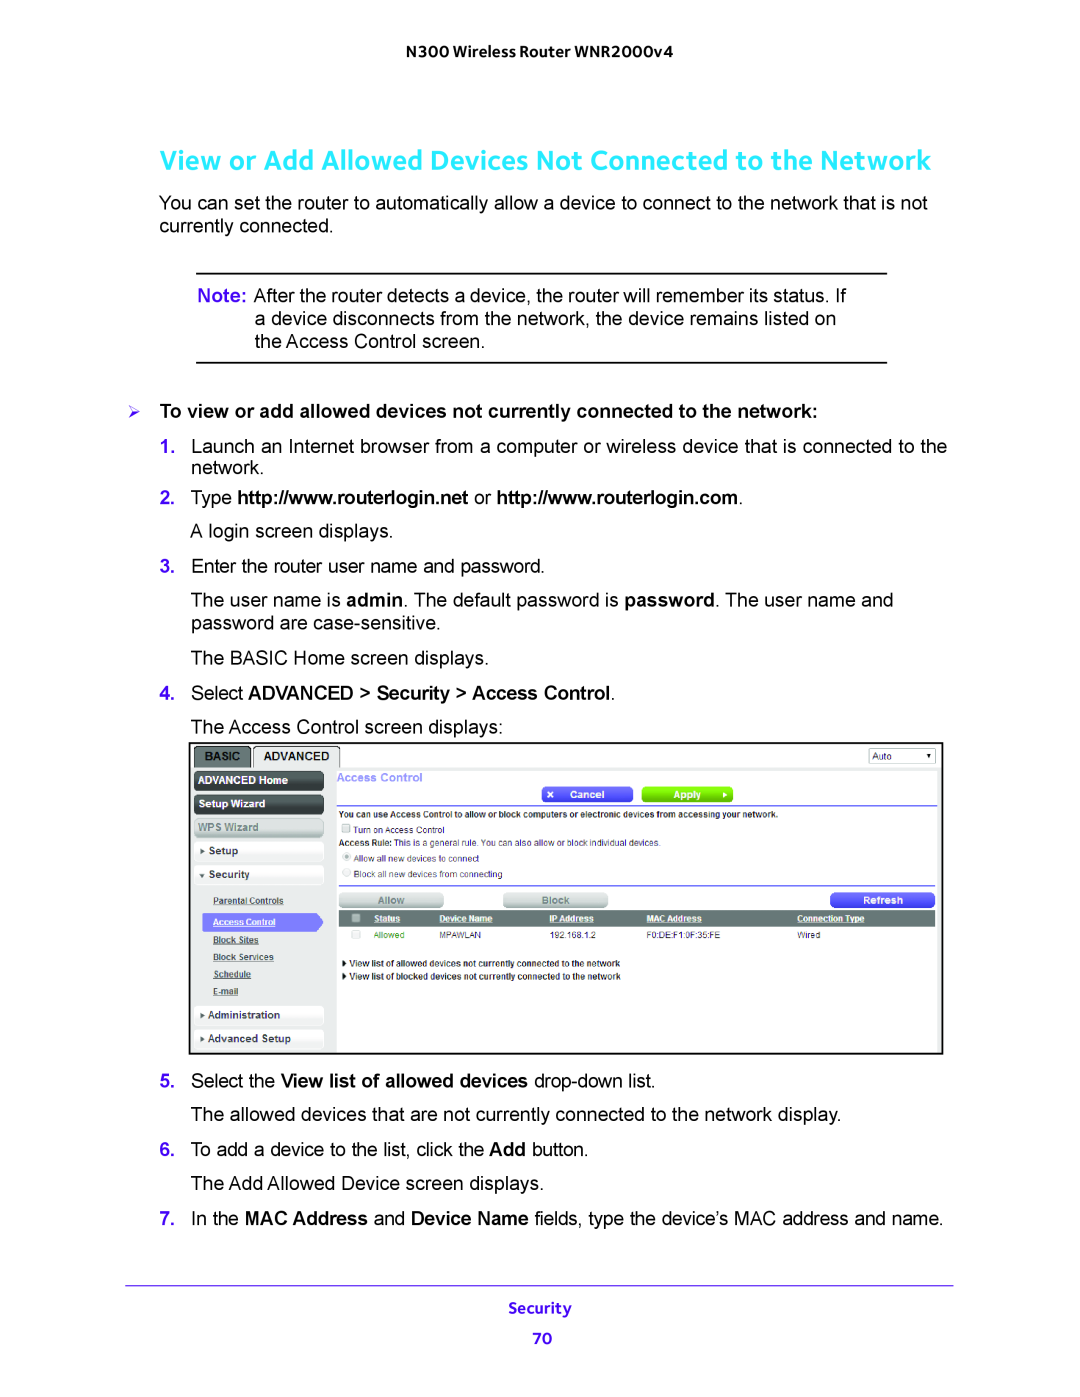 NETGEAR WNR200v4 user manual View or Add Allowed Devices Not Connected to the Network 